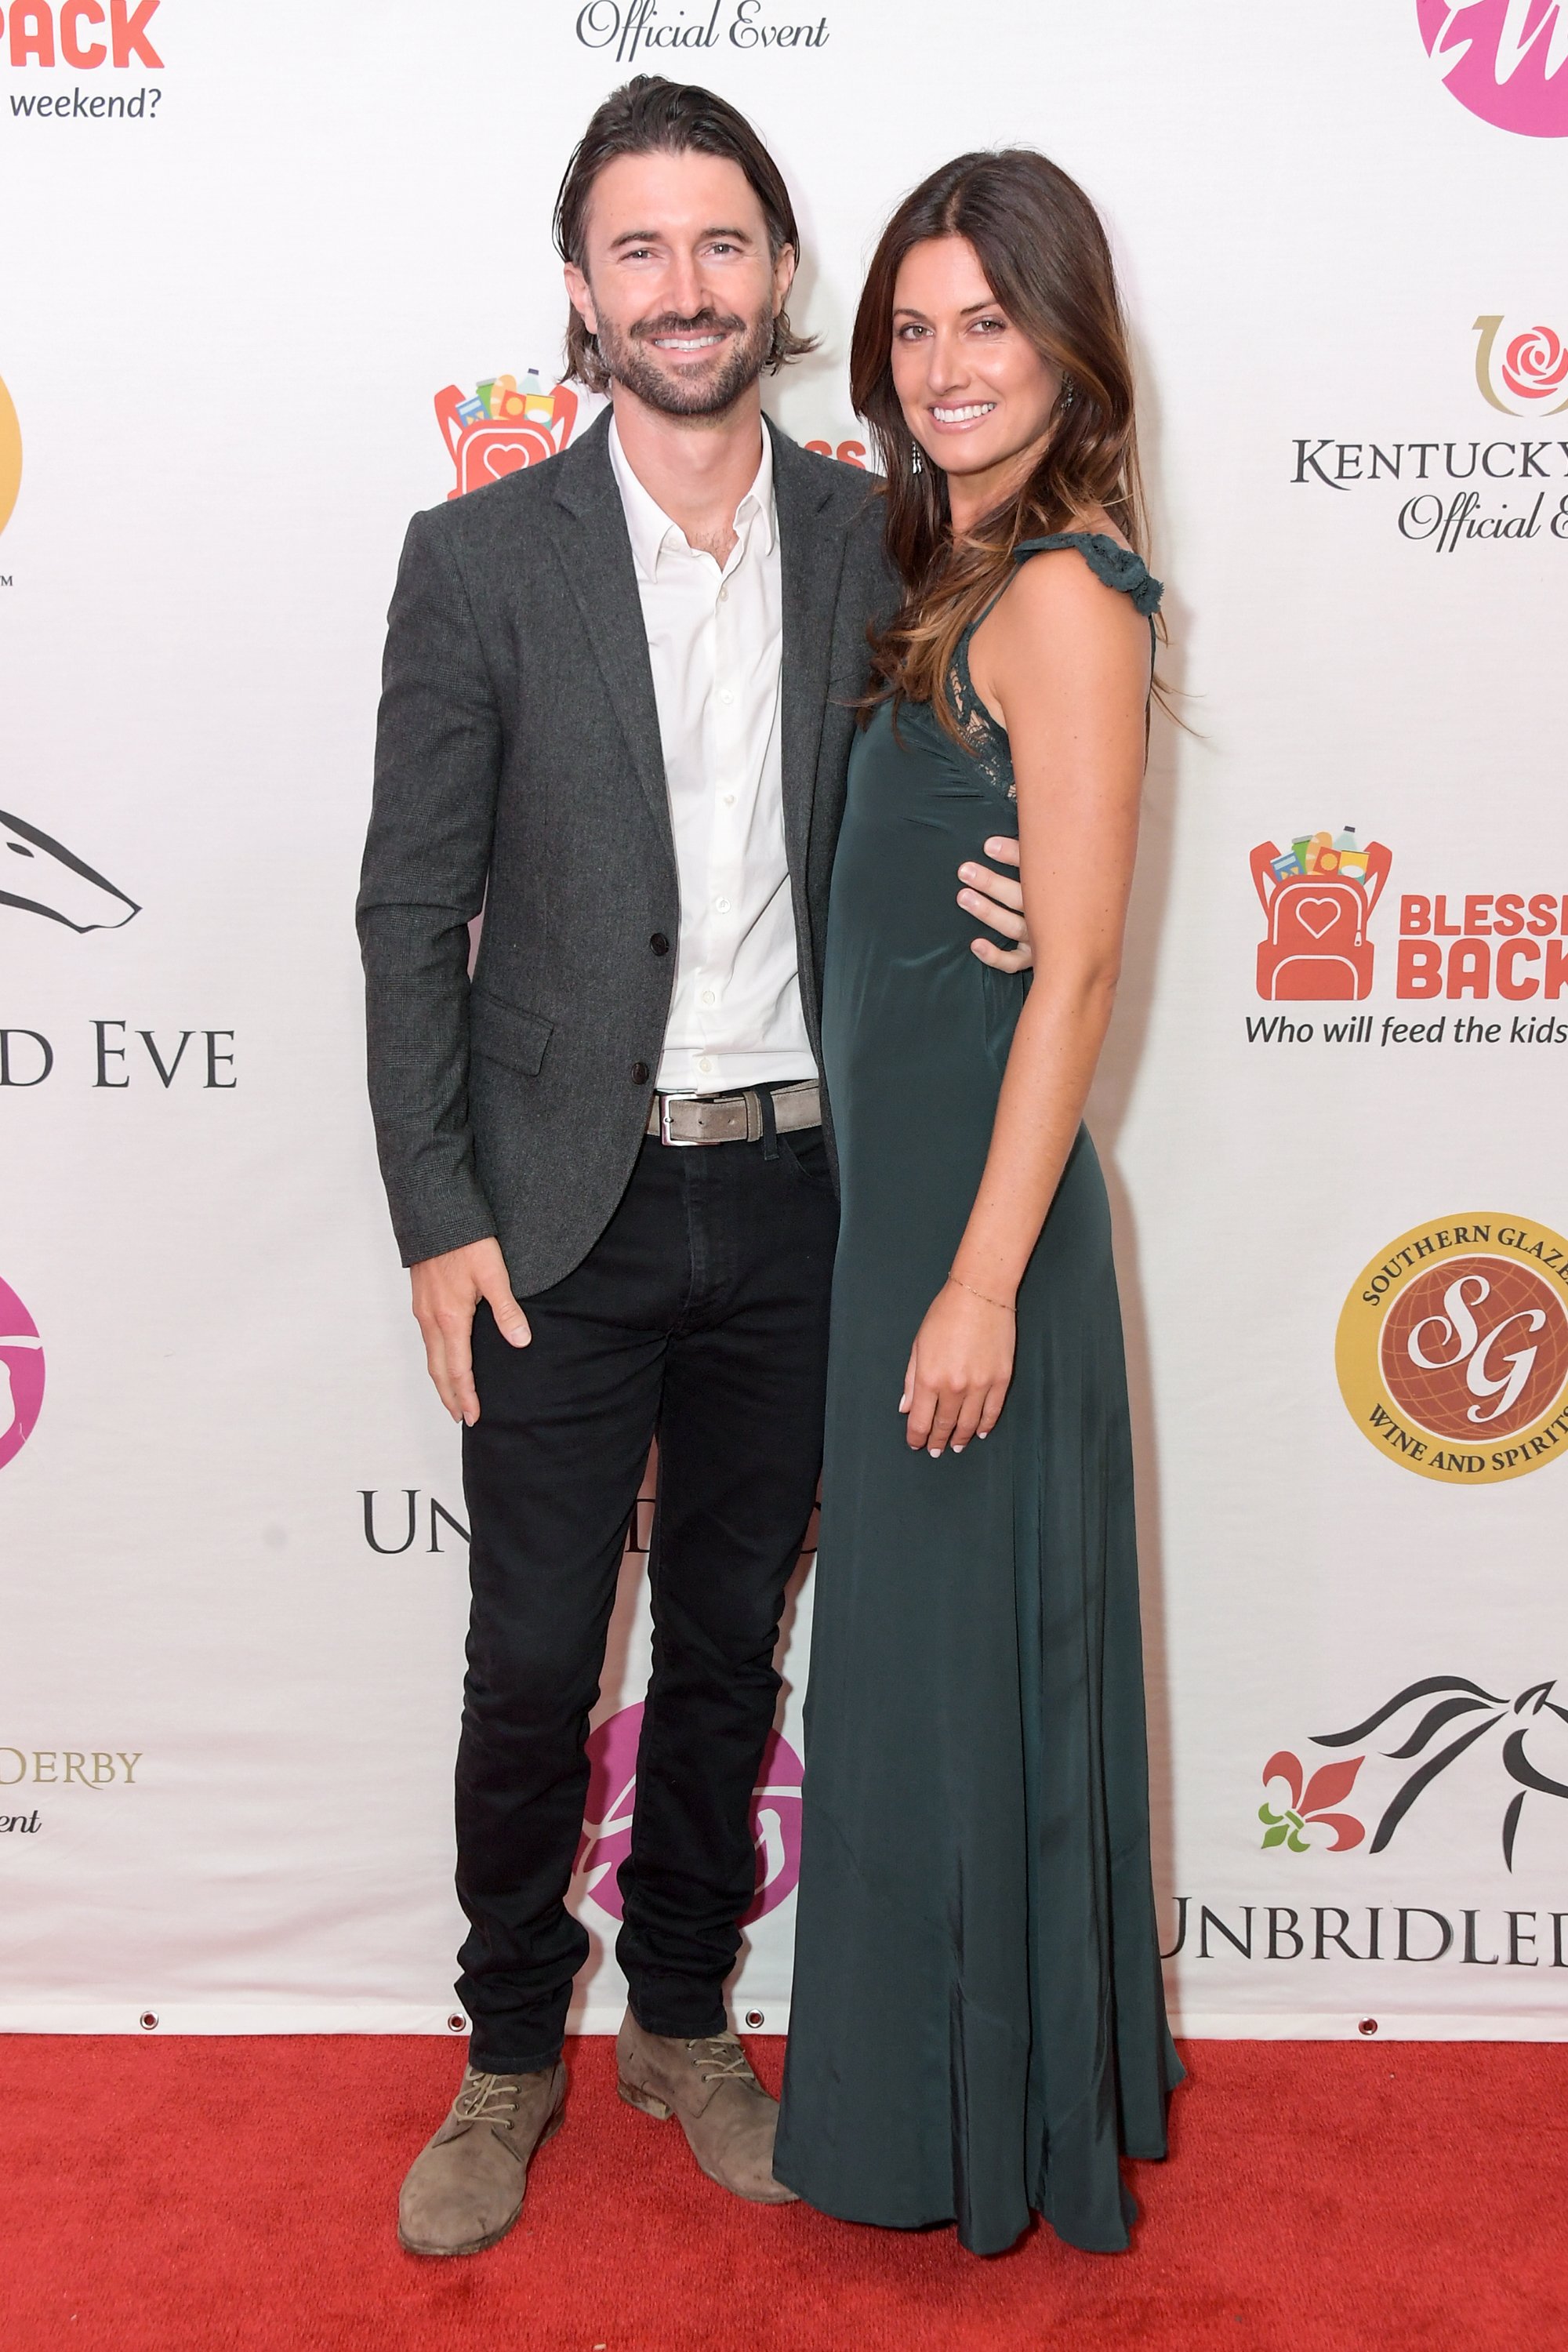 Brandon Jenner and Cayley Stoker attend the 145th Kentucky Derby Unbridled Eve Gala on May 03, 2019, in Louisville, Kentucky. | Source: Getty Images.